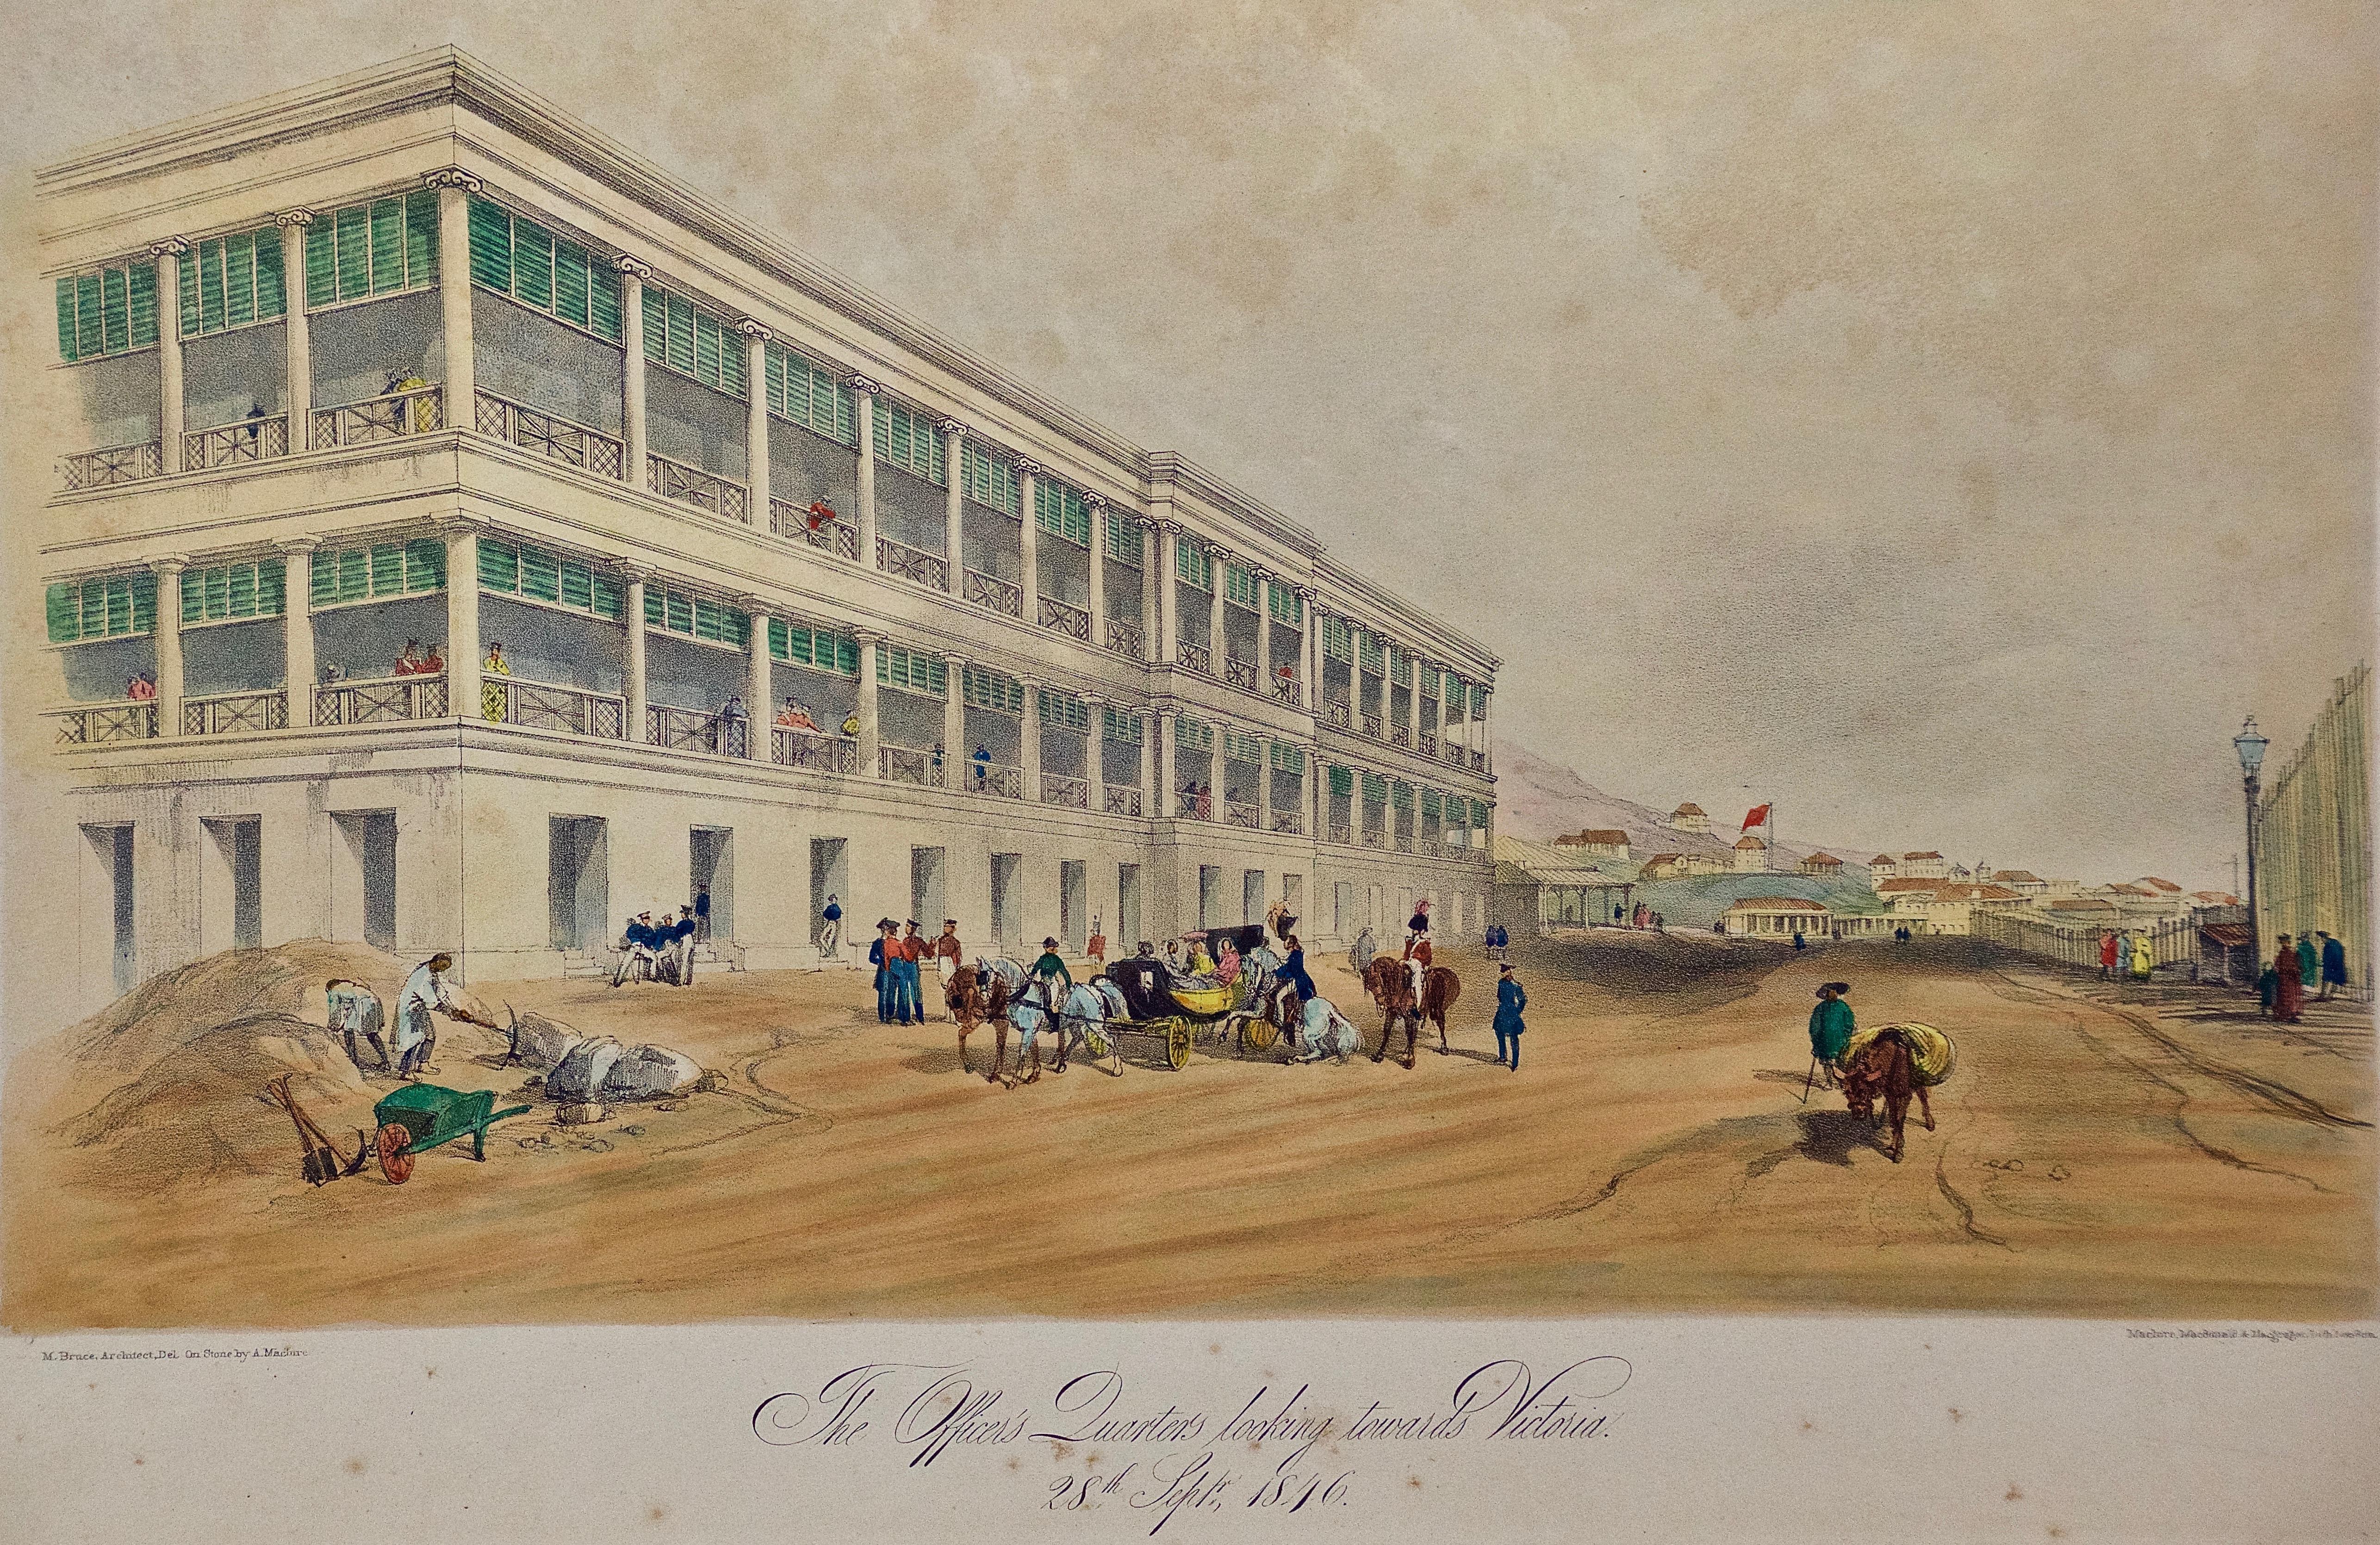 Architectural View of the Officers' Quarters, Hong Kong, 19th Century - Print by Murdoch Bruce